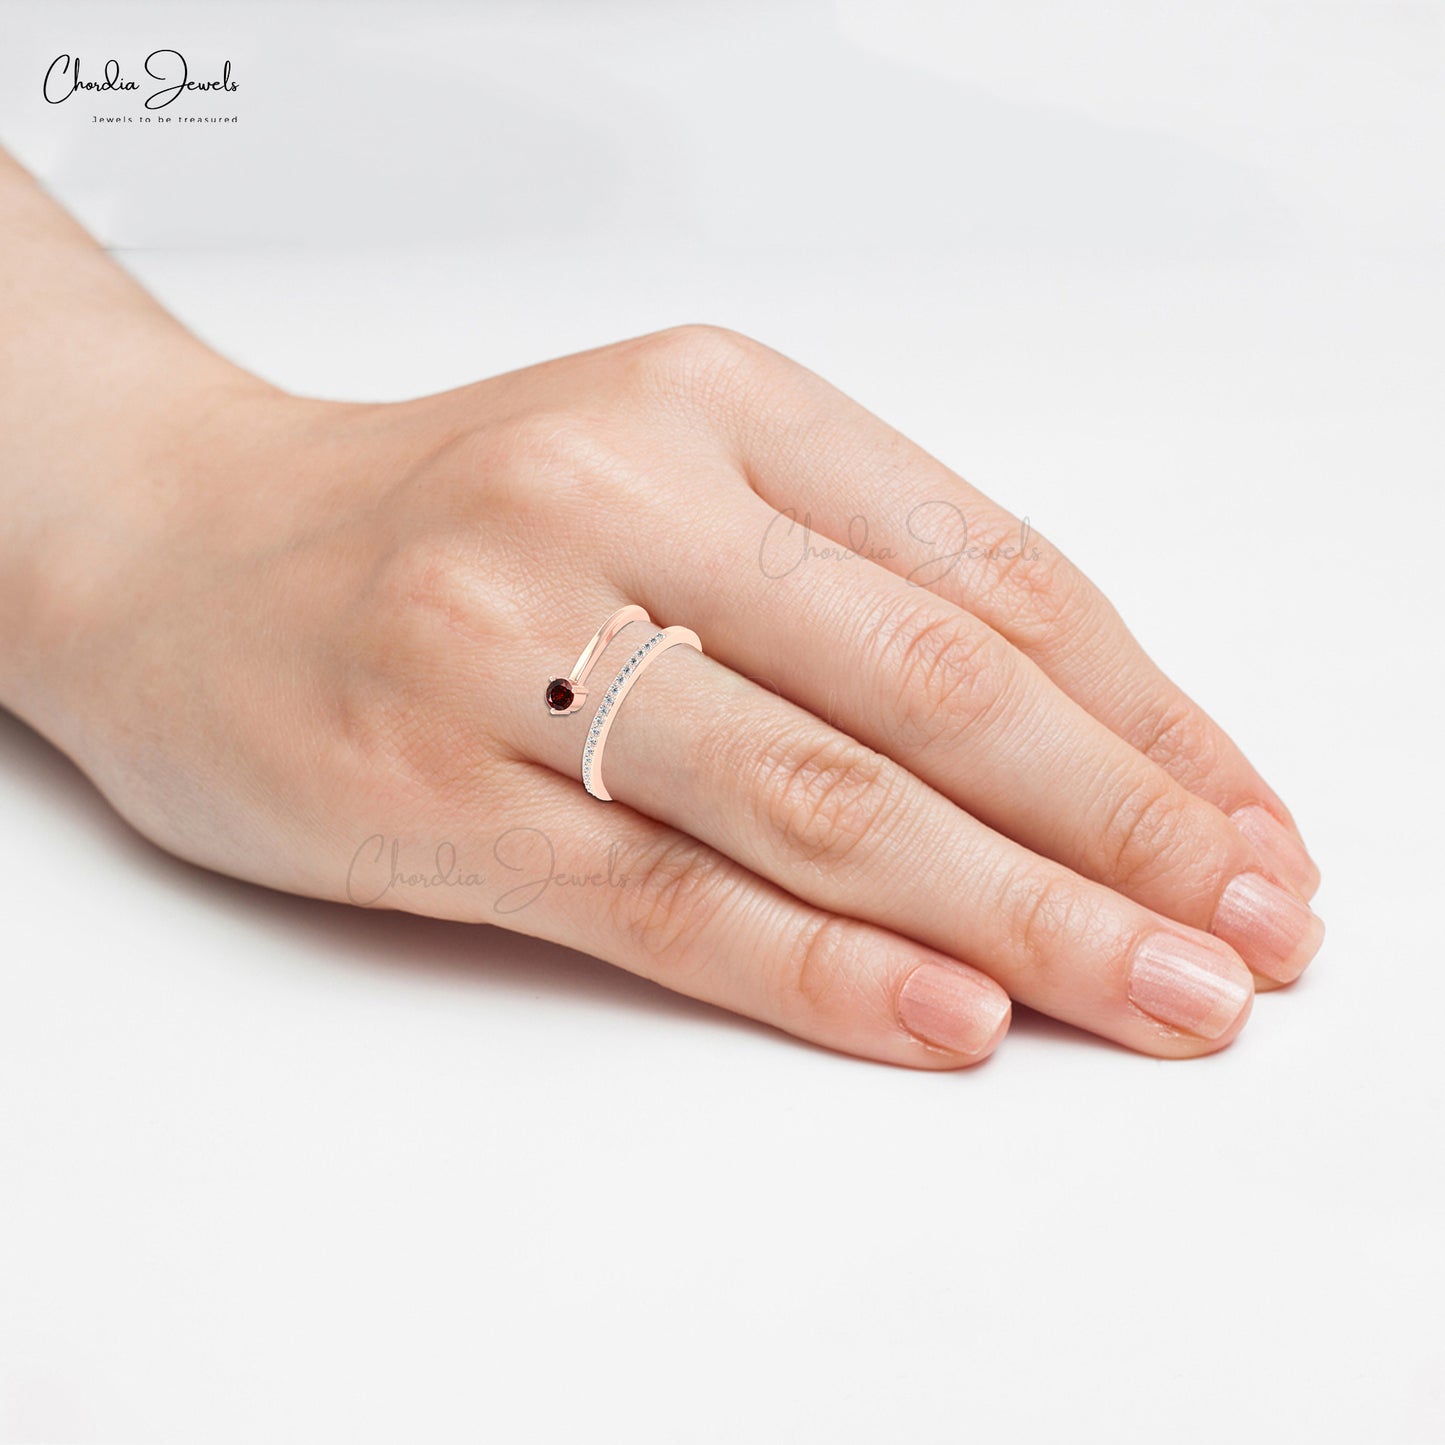 Dainty Ring with Real Garnet and Diamonds in 14k Gold